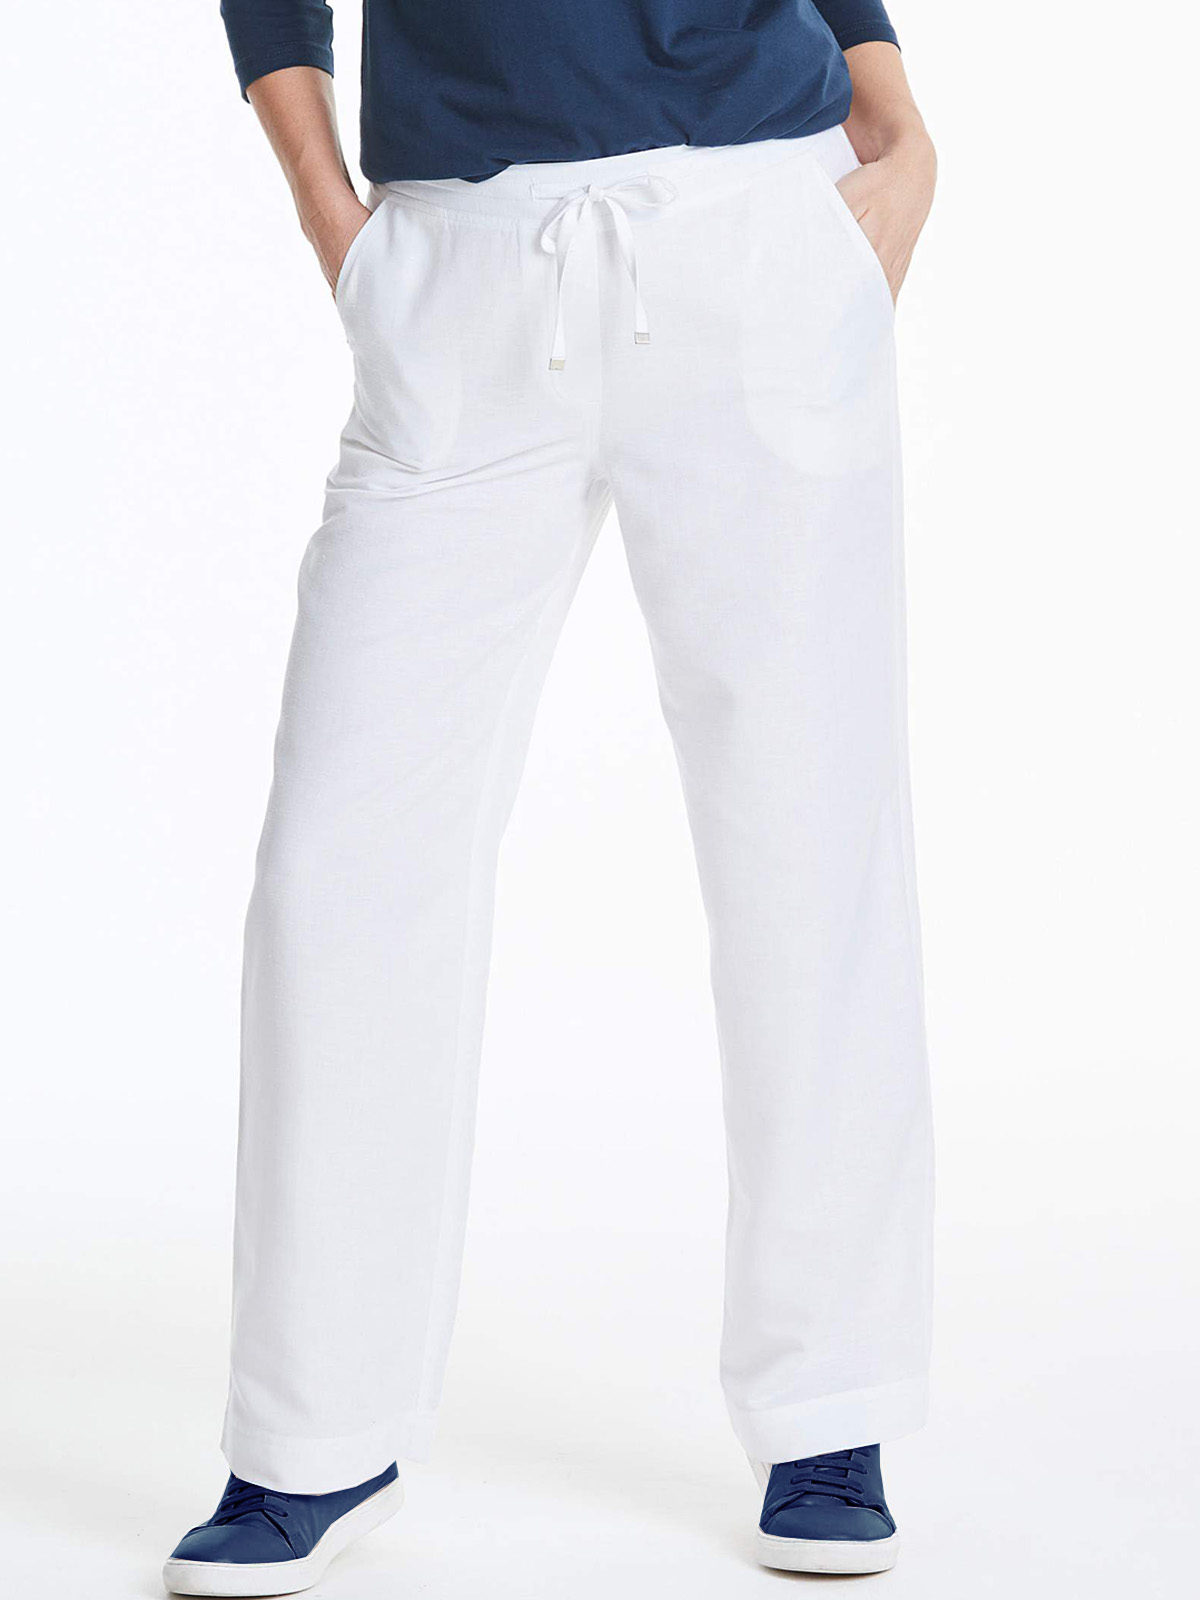 Capsule - - Capsule WHITE Linen Blend Easy Care Trousers - Plus Size 14